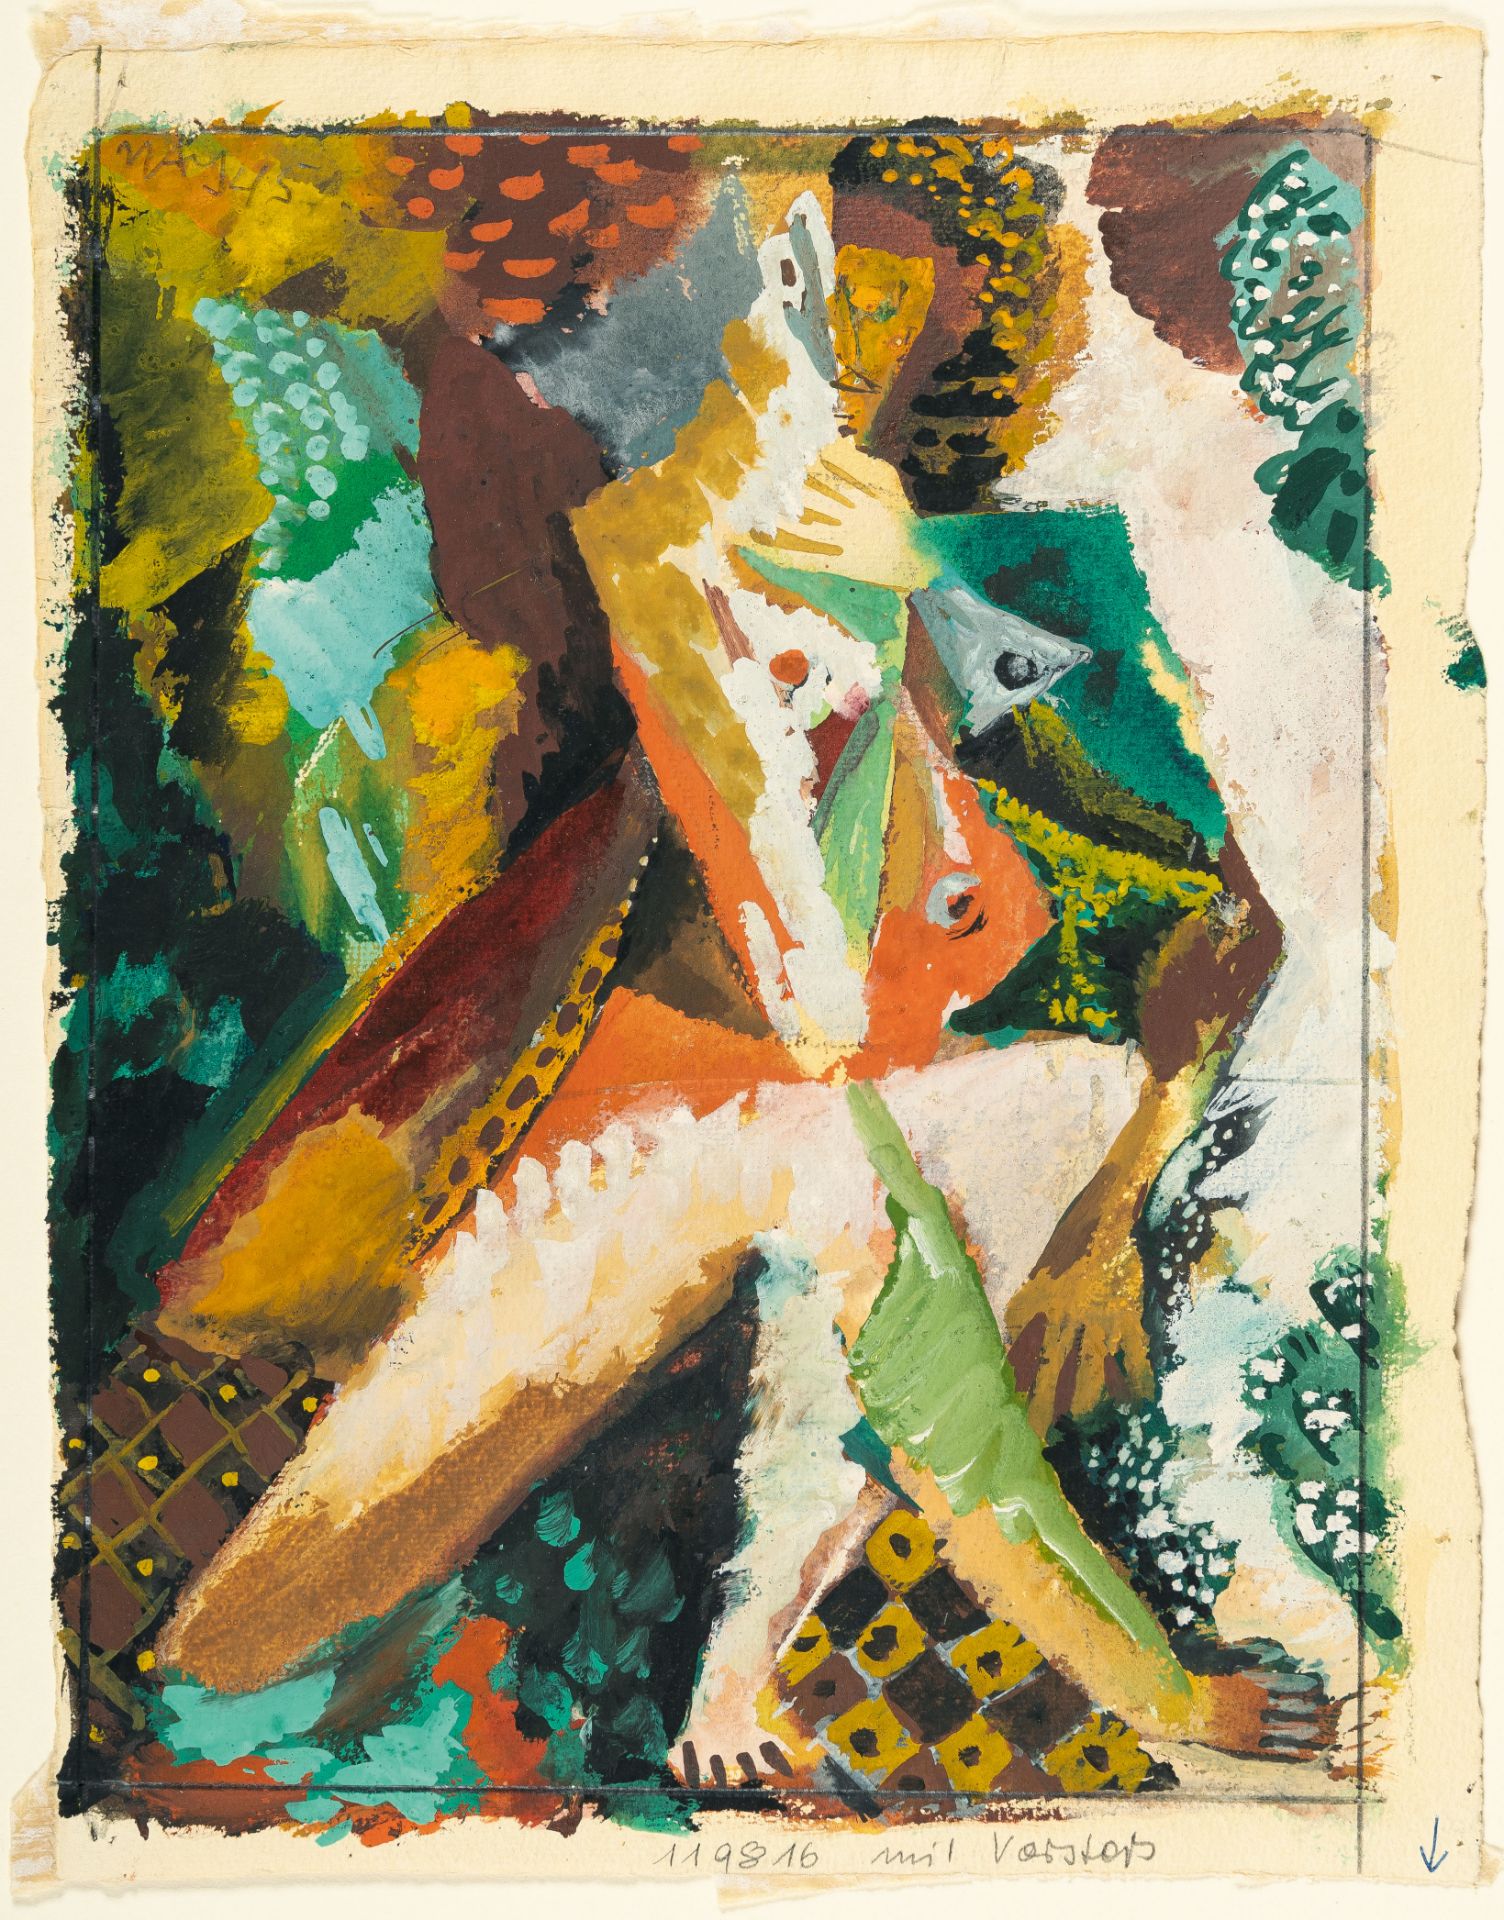 Ernst Wilhelm Nay, Seated figure.Gouache on firm, slightly textured watercolour paper. (19)45. Ca. - Image 2 of 3